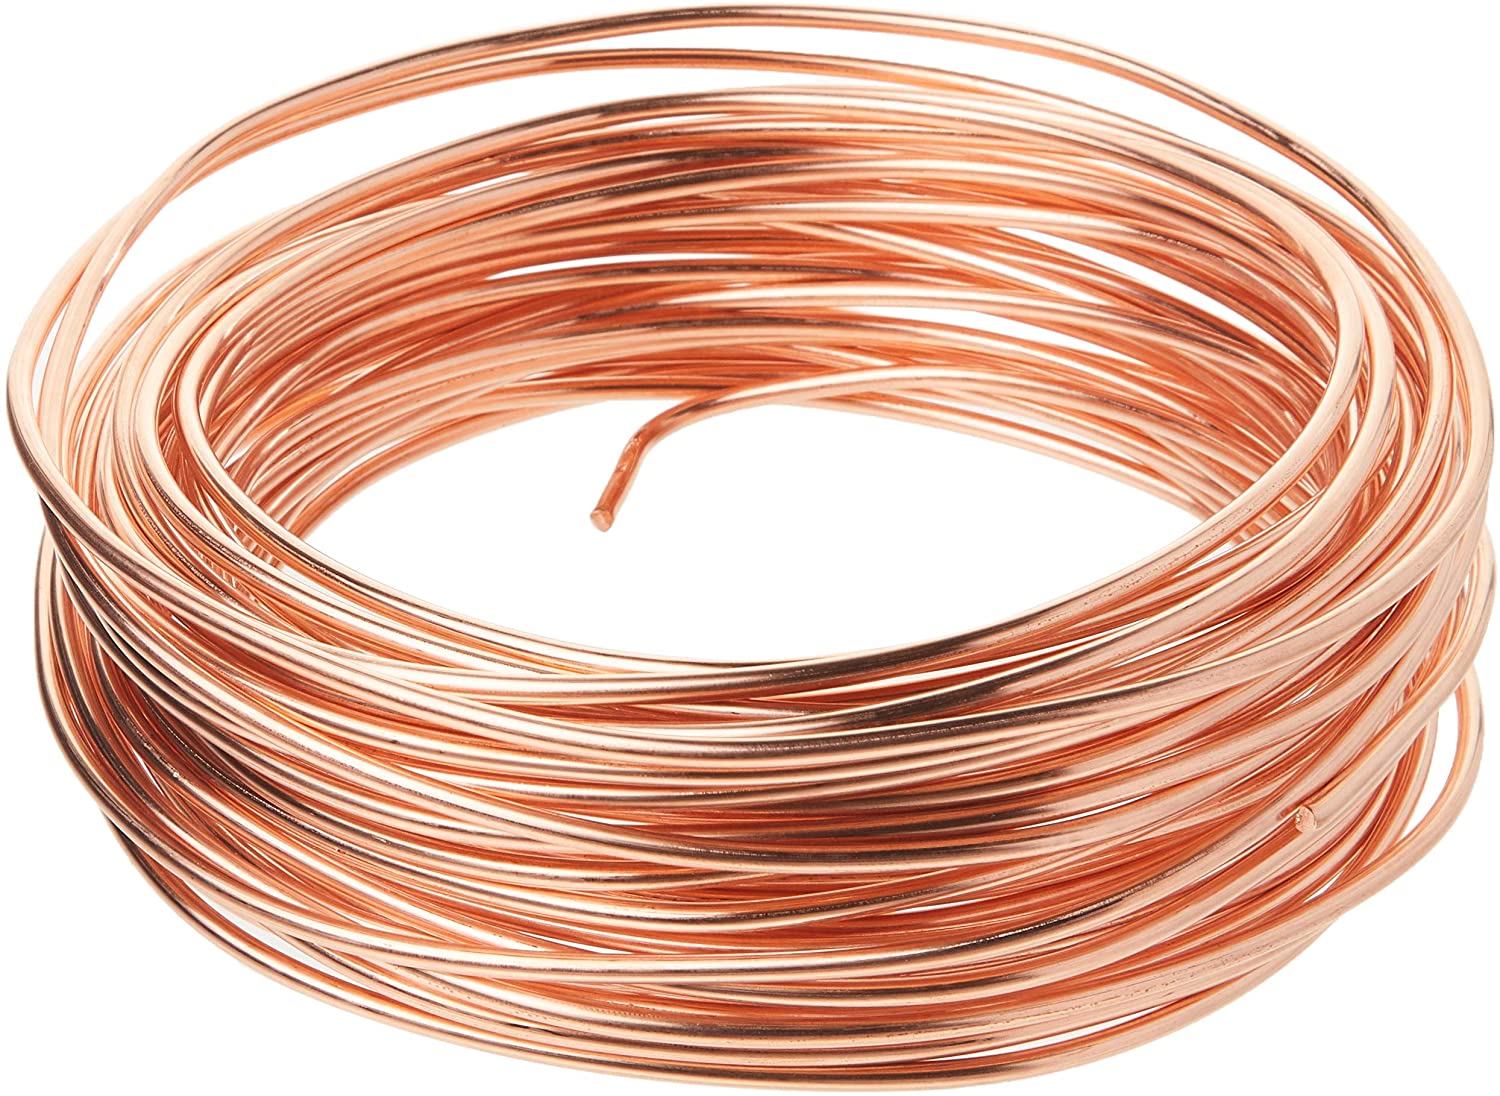 Enameled Copper Wire For Jewelry & Crafts Making - Vietnam Crafts,  Wholesale 3D Pop Up Cards, Buffalo Horn Jewelry